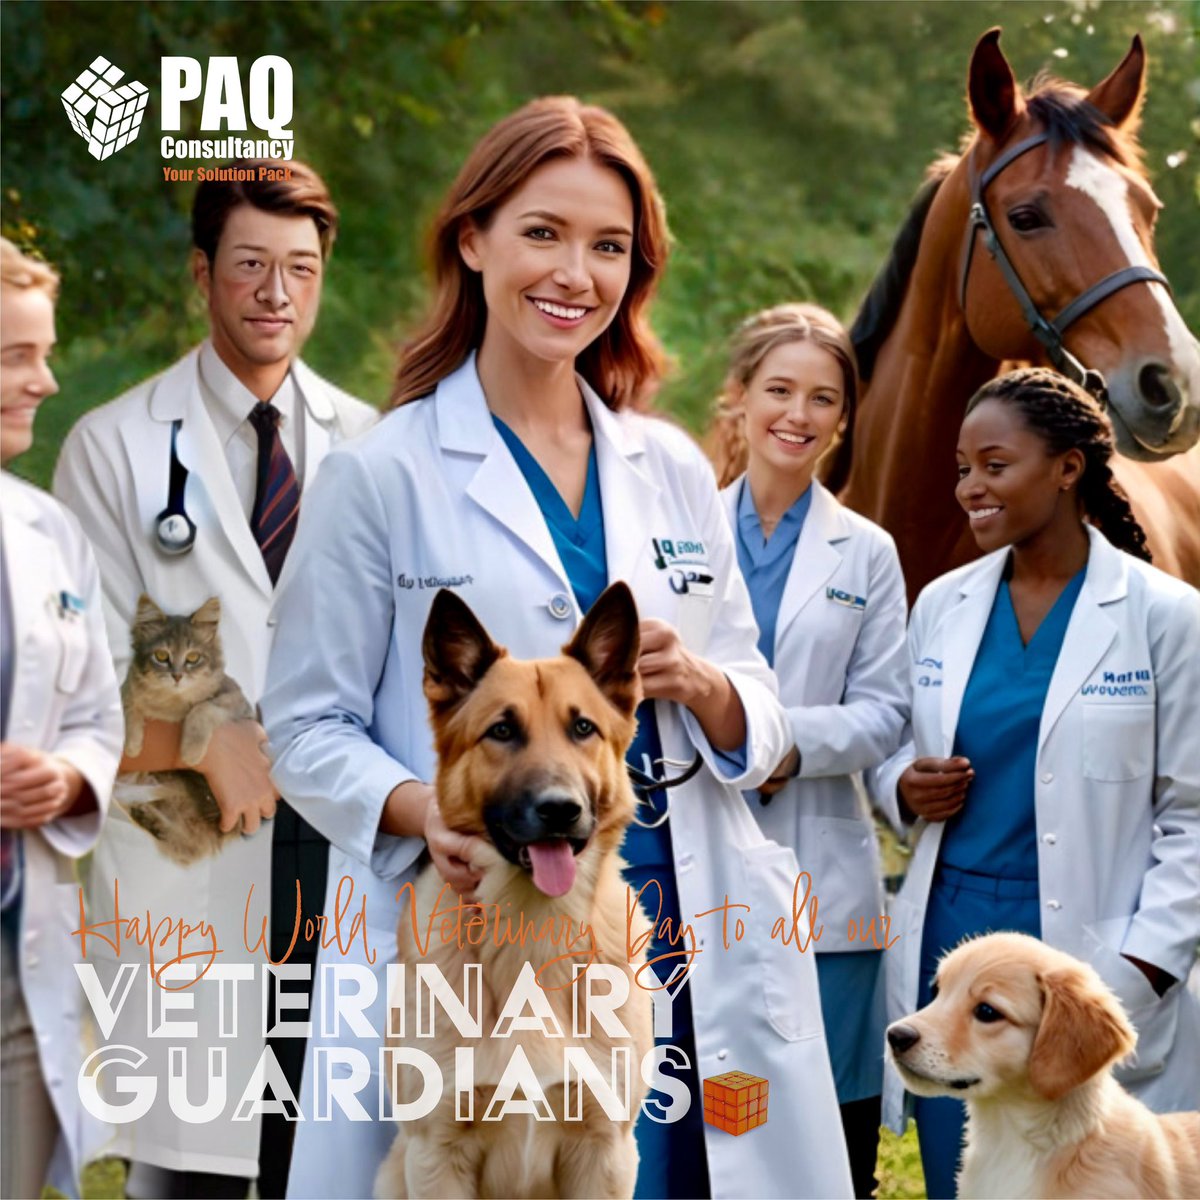 🌍🐾 Celebrating #WorldVeterinaryDay with gratitude for the incredible dedication of veterinarians worldwide. From safeguarding animal health to championing #OneHealth, they're true heroes! PAQ Consultancy salutes their tireless efforts in creating a healthier, happier world. 🐾